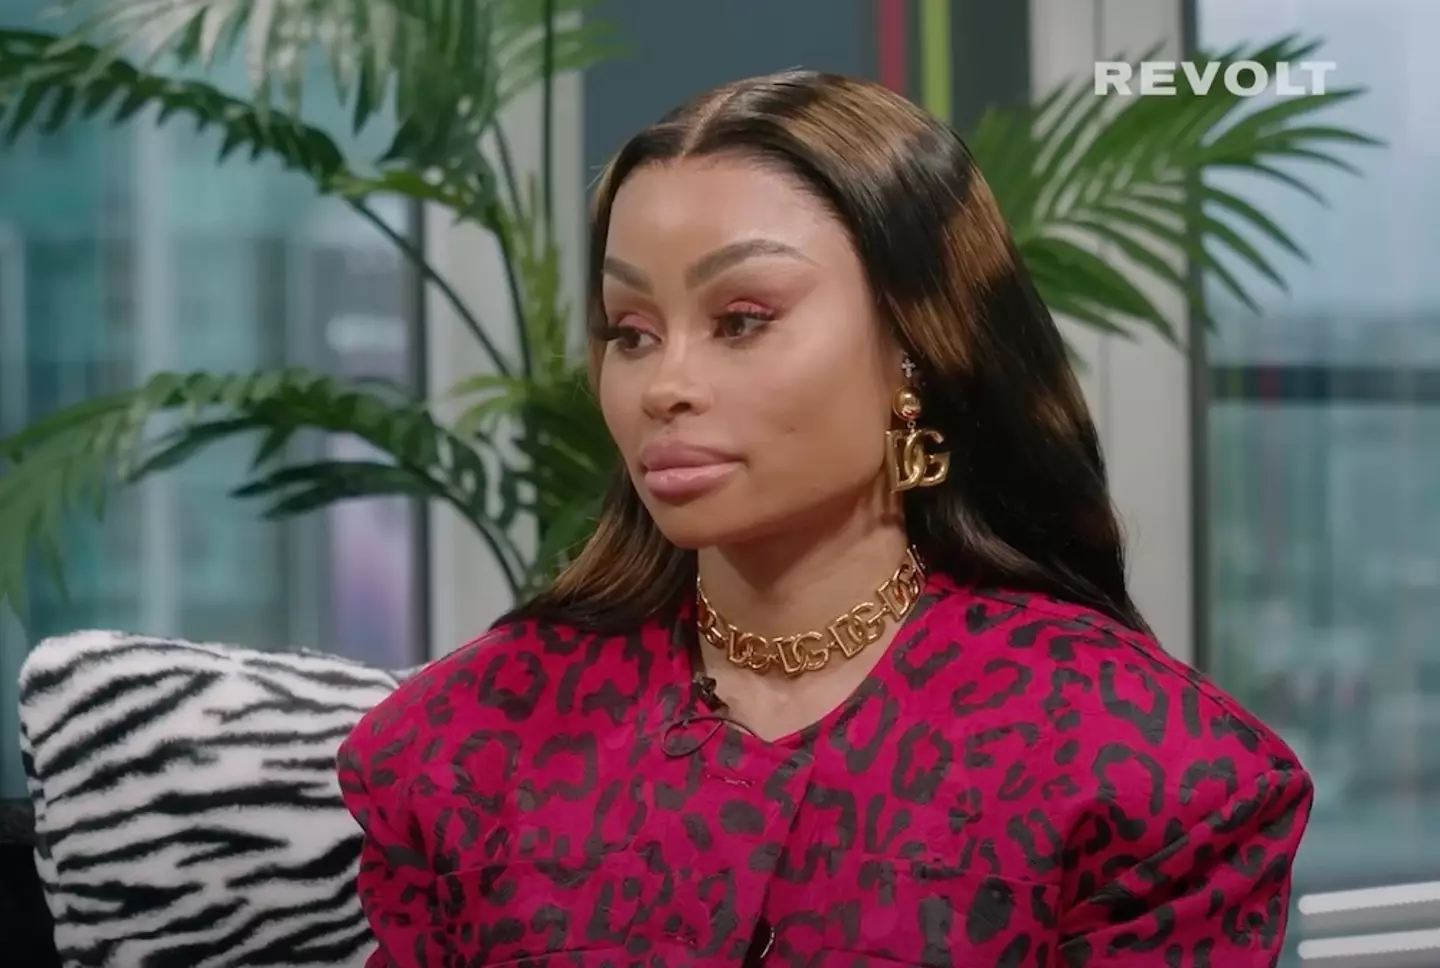 Blac Chyna spoke frankly in an episode of The Jason Lee Show.